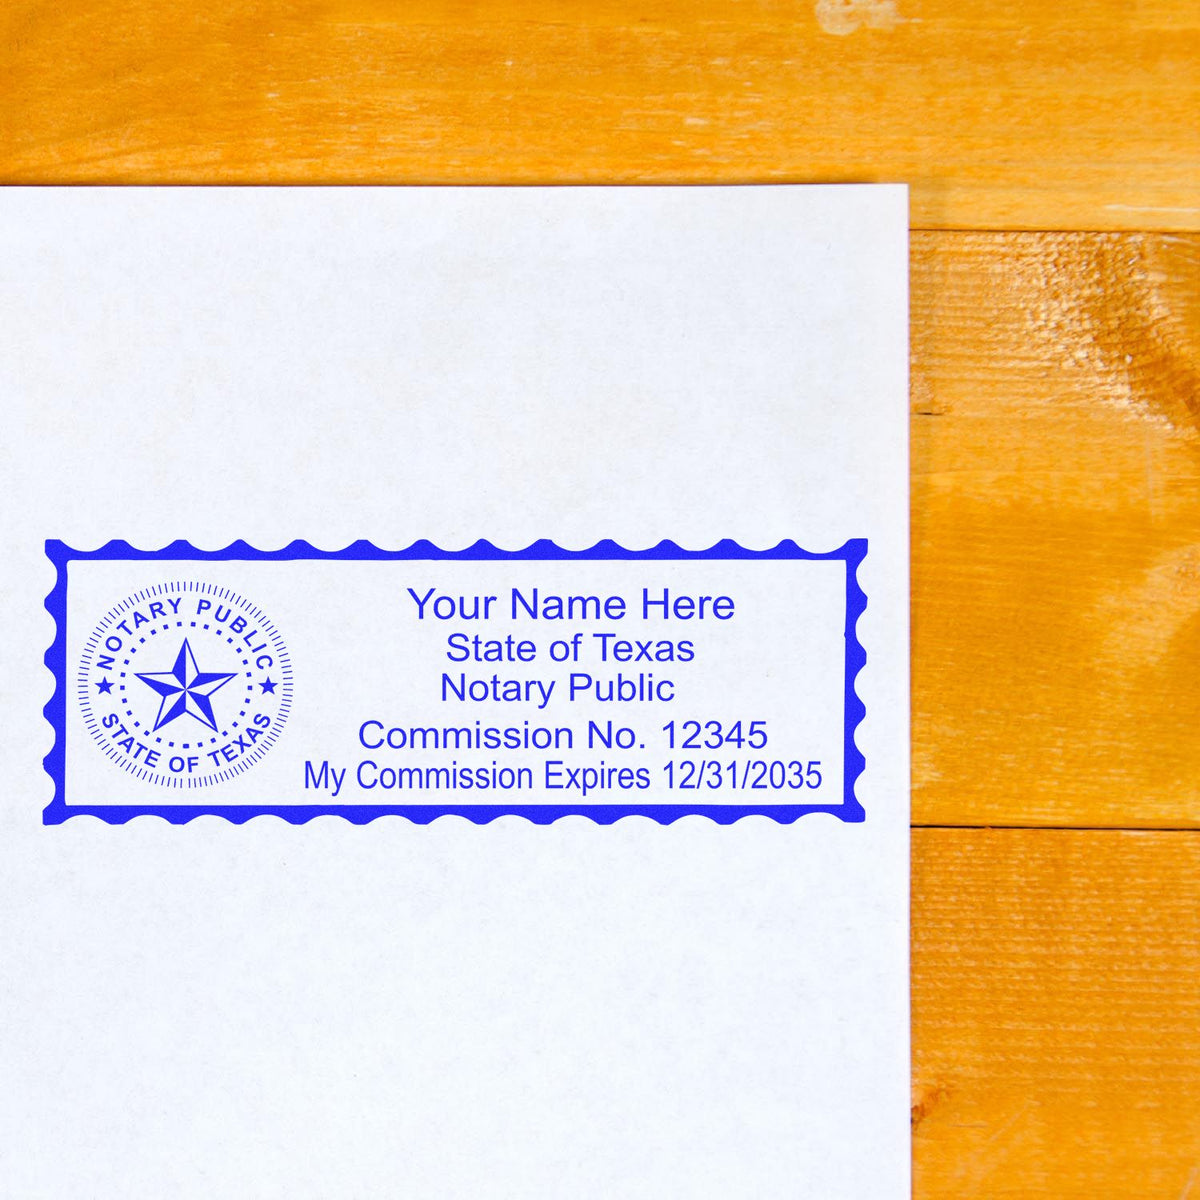 An alternative view of the Heavy-Duty Texas Rectangular Notary Stamp stamped on a sheet of paper showing the image in use